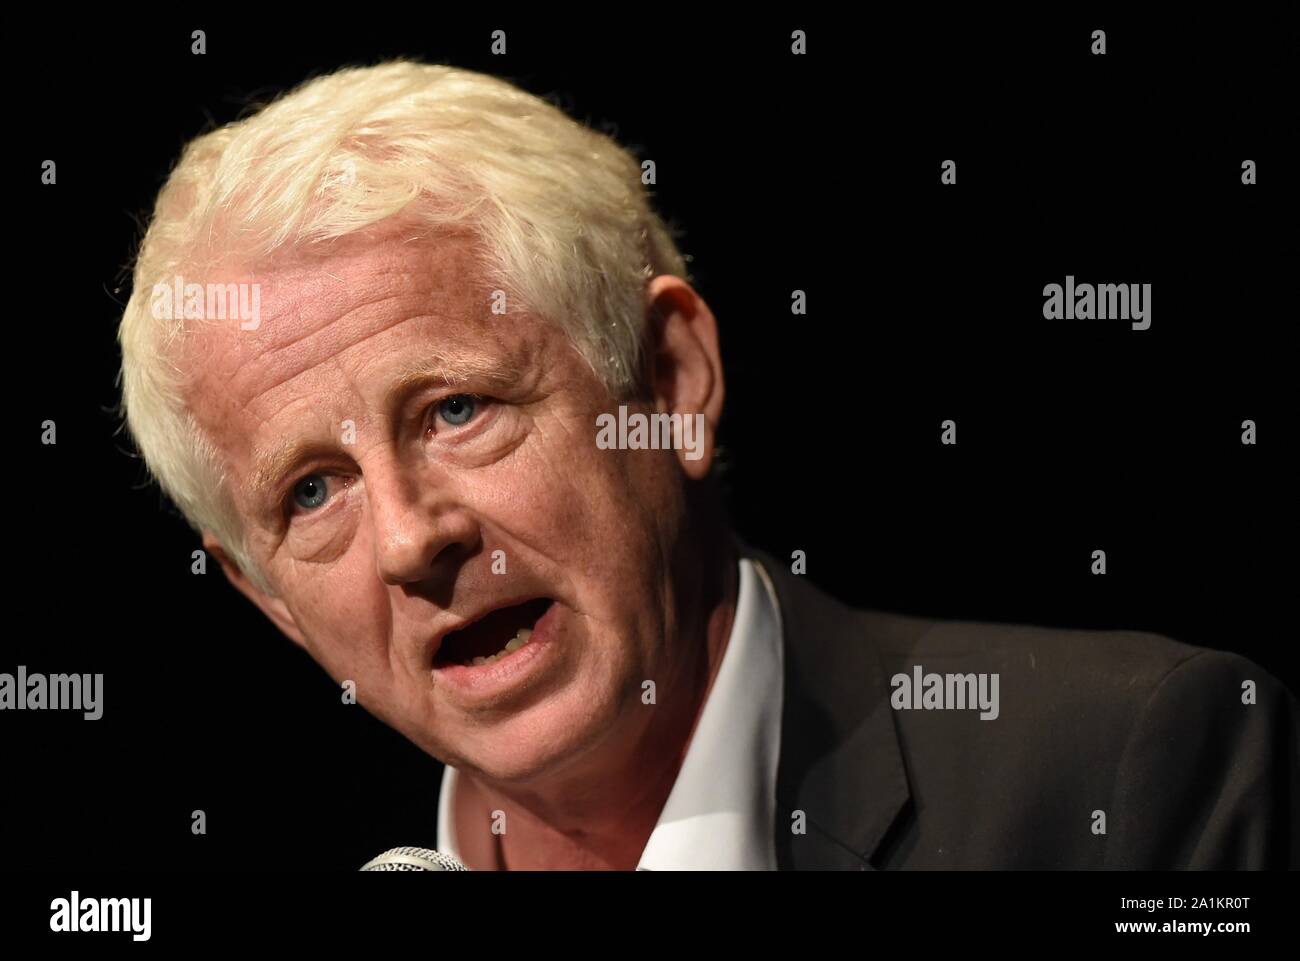 Richard Curtis at the press conference for Global Citizen Goal Live: The Possible Dream 2020 Campaign Launch, St. Ann's Warehouse, Brooklyn, NY September 26, 2019. Photo By: Kristin Callahan/Everett Collection Stock Photo